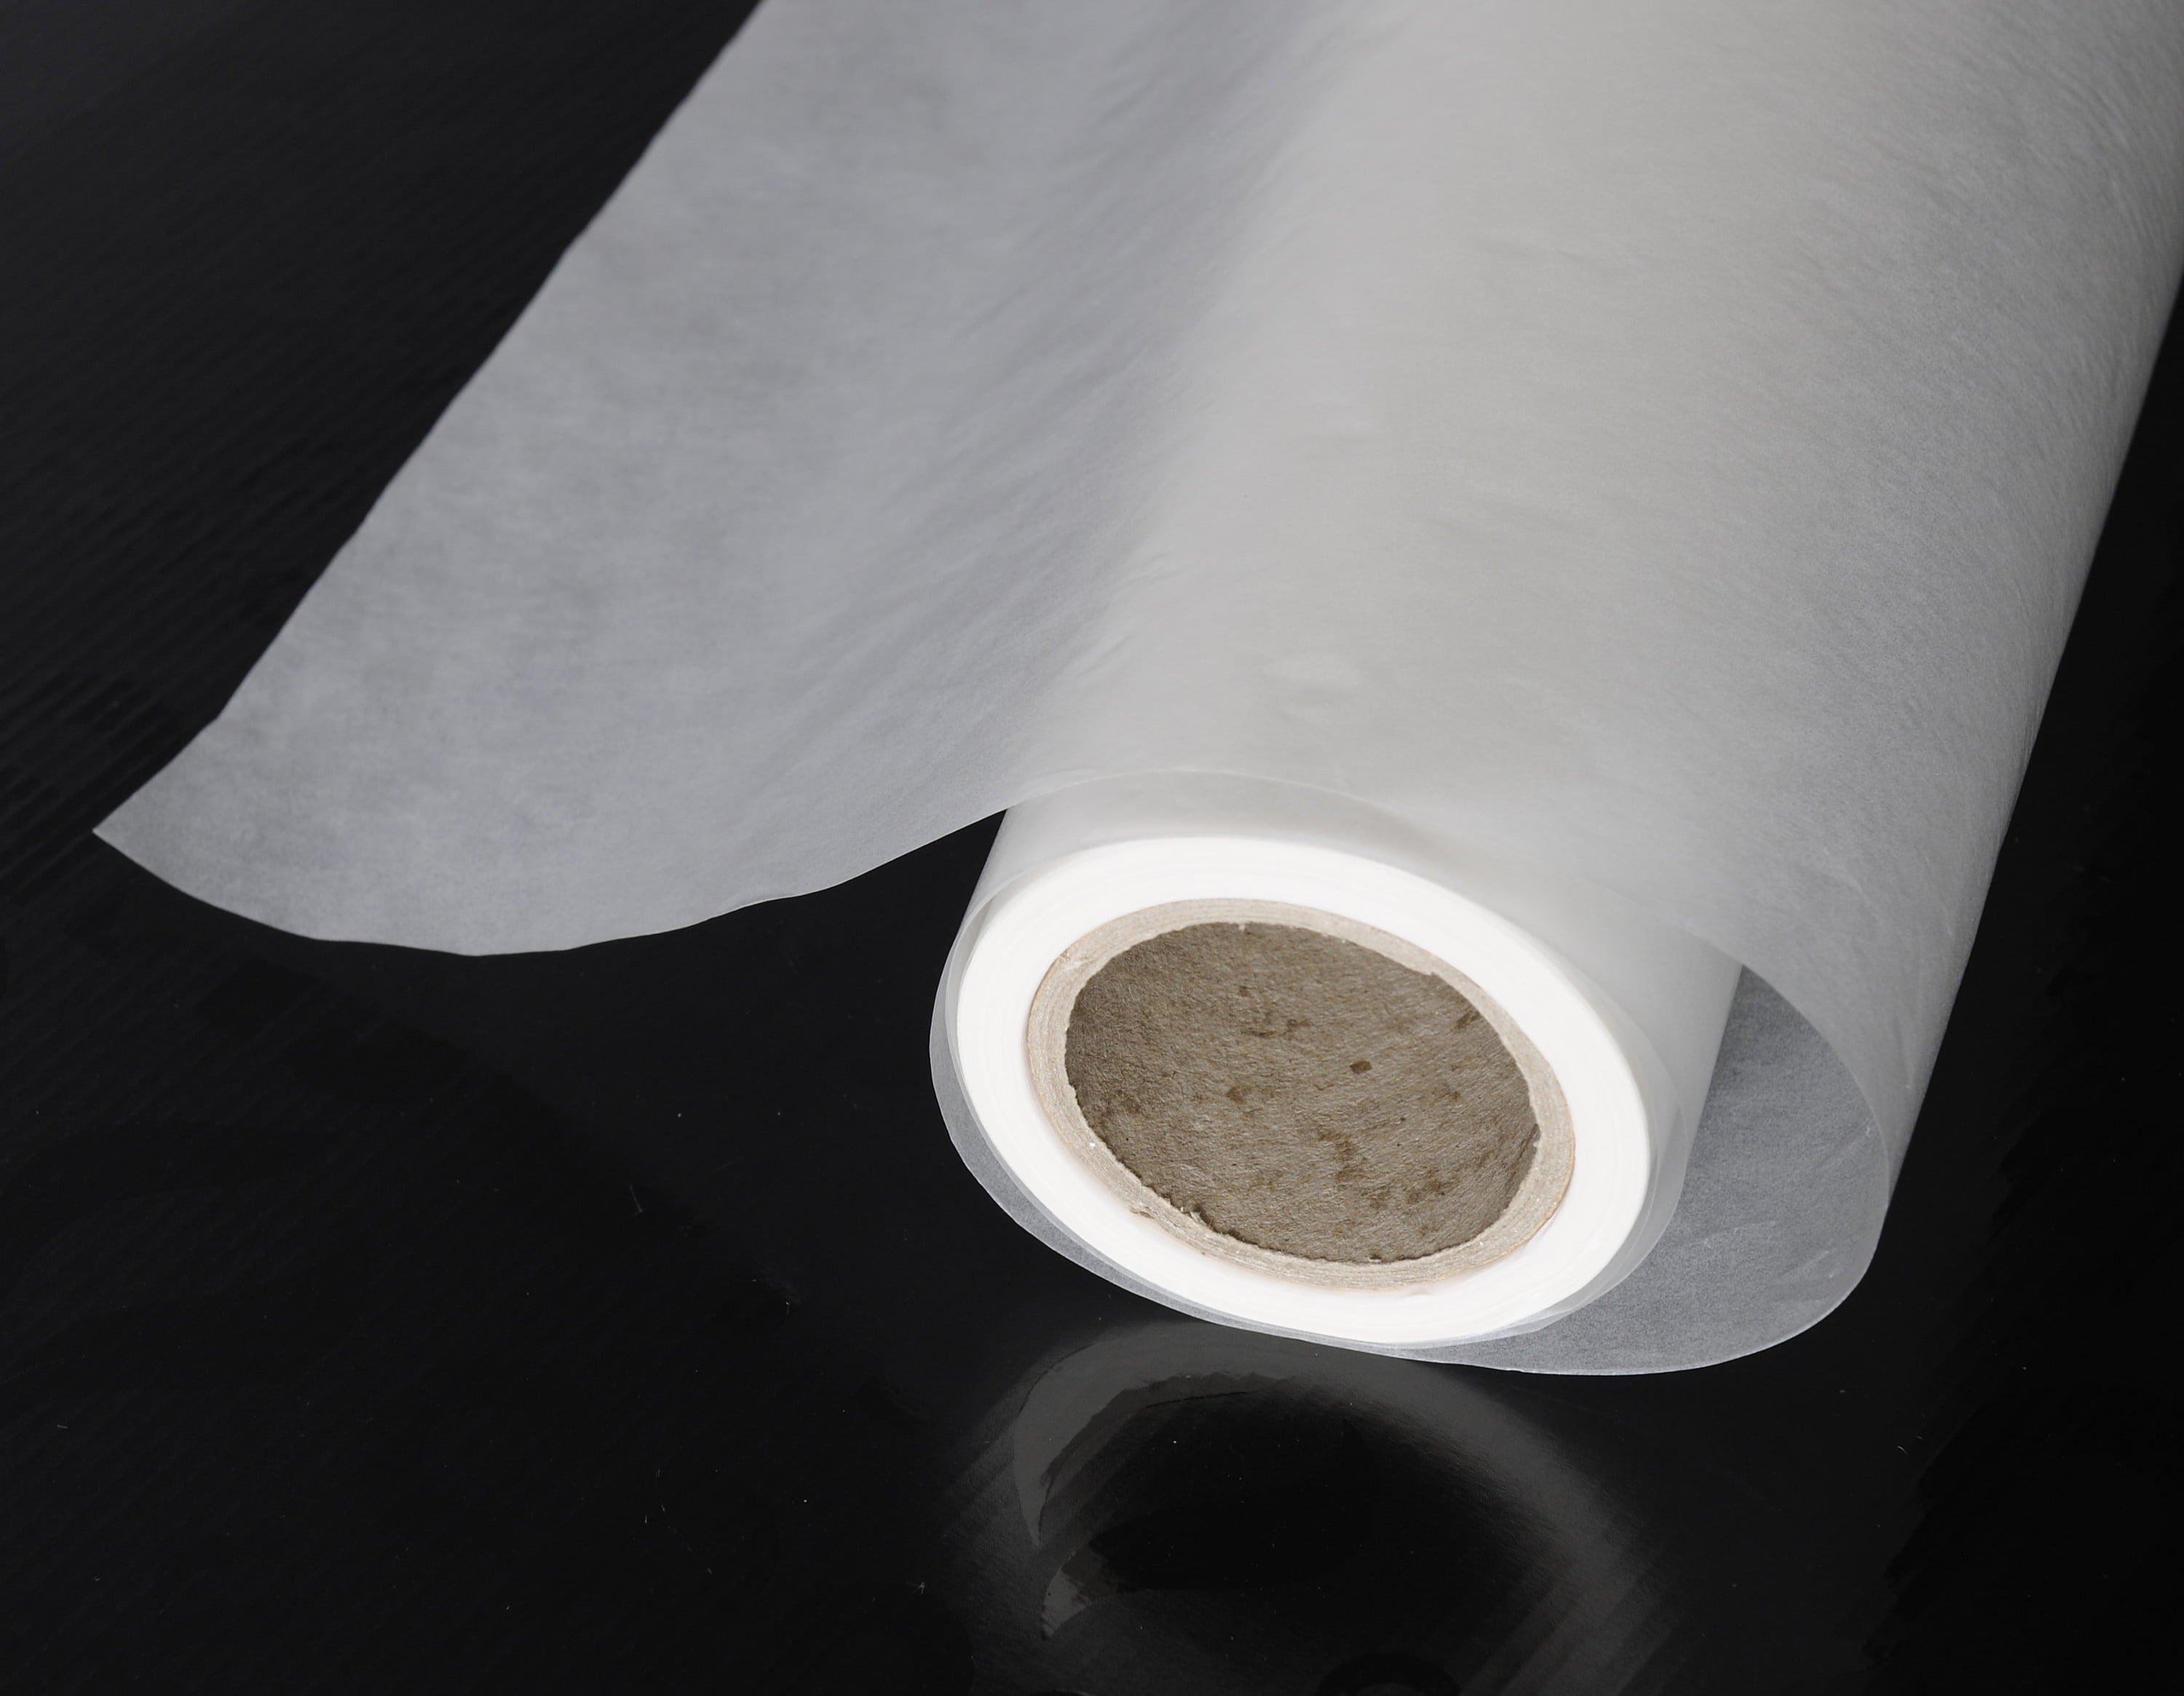 Glassine Paper Roll for Artwork, Crafts, and Baked Goods (36 Inches x 25  Yards), PACK - Kroger